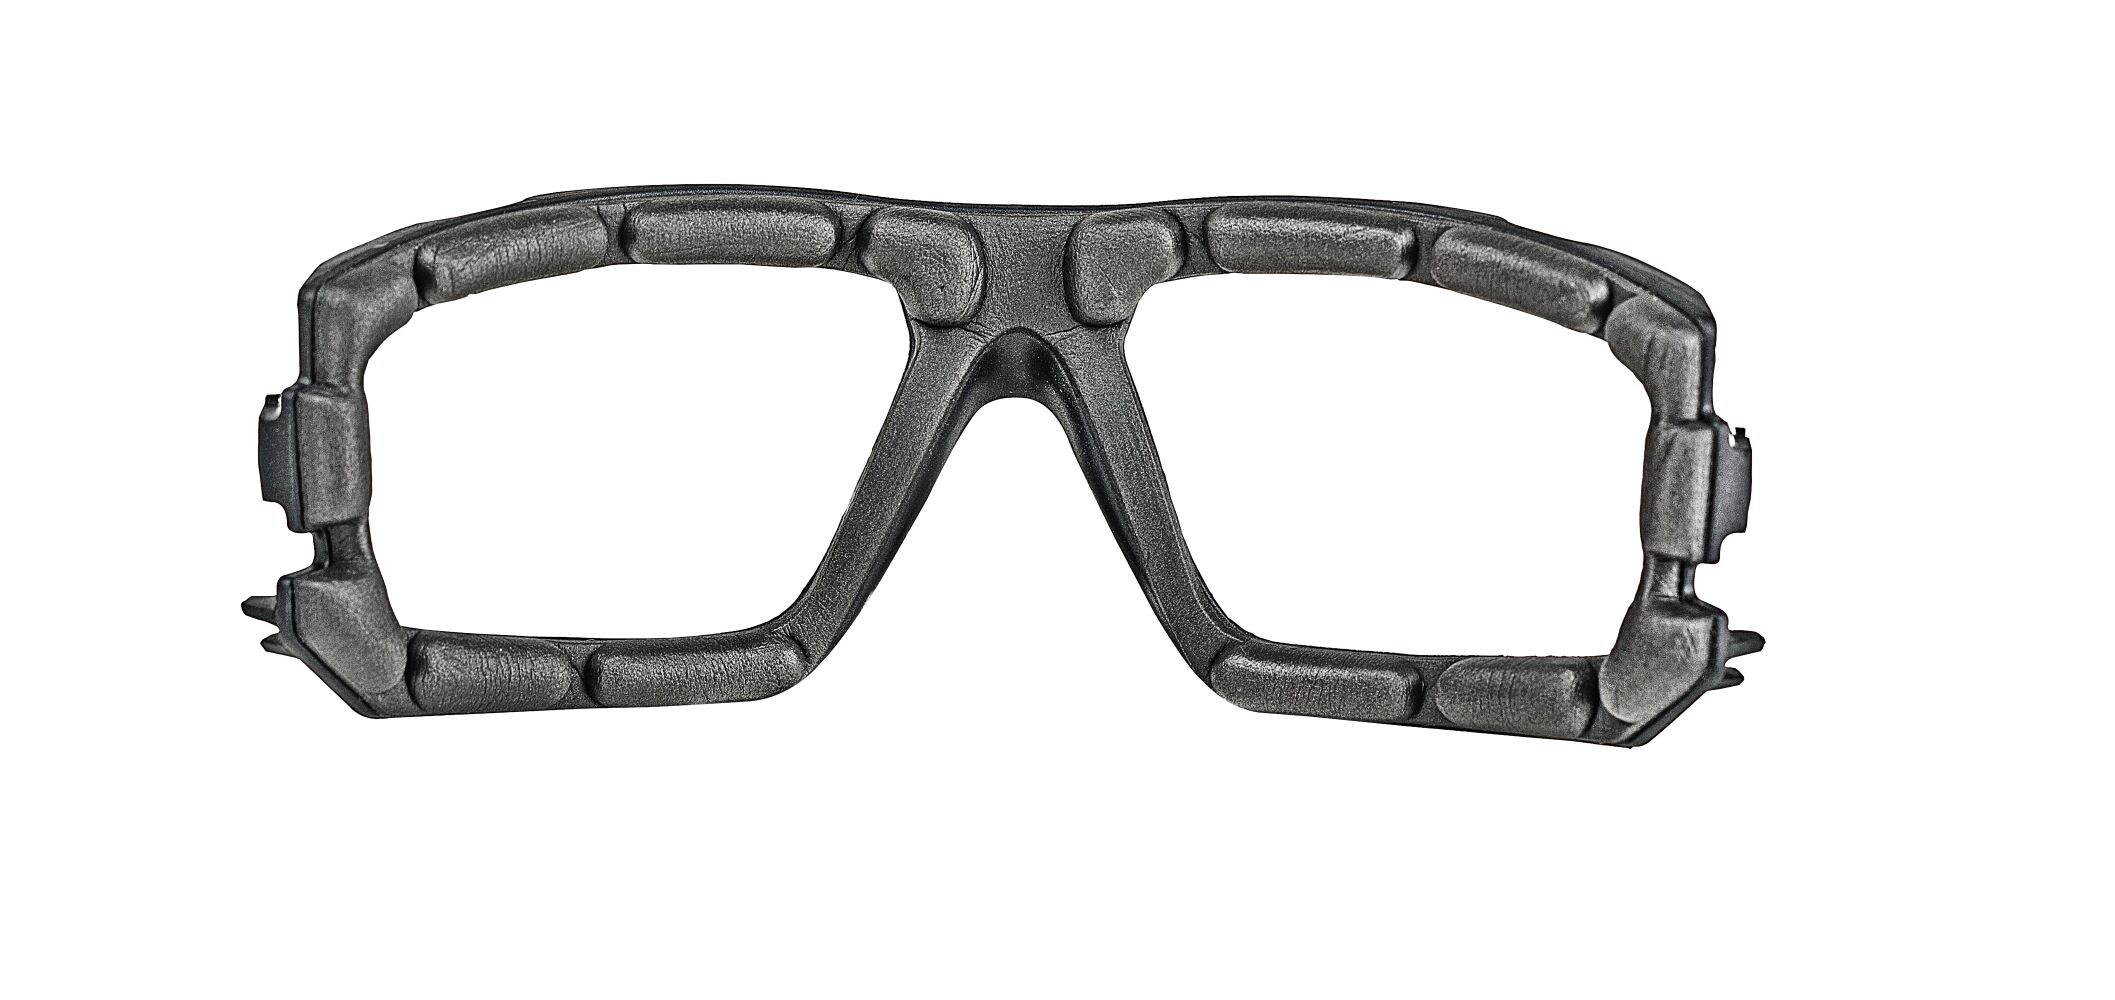 vergeven Zeker Misverstand SoundShield Pro Series 1 Full Face EVA Foam Gasket for READYMAX SoundShield  Pro Series 1 Safety Glasses (Item Only Fits Our Pro Series Safety Glasses)  in the Eye Protection department at Lowes.com